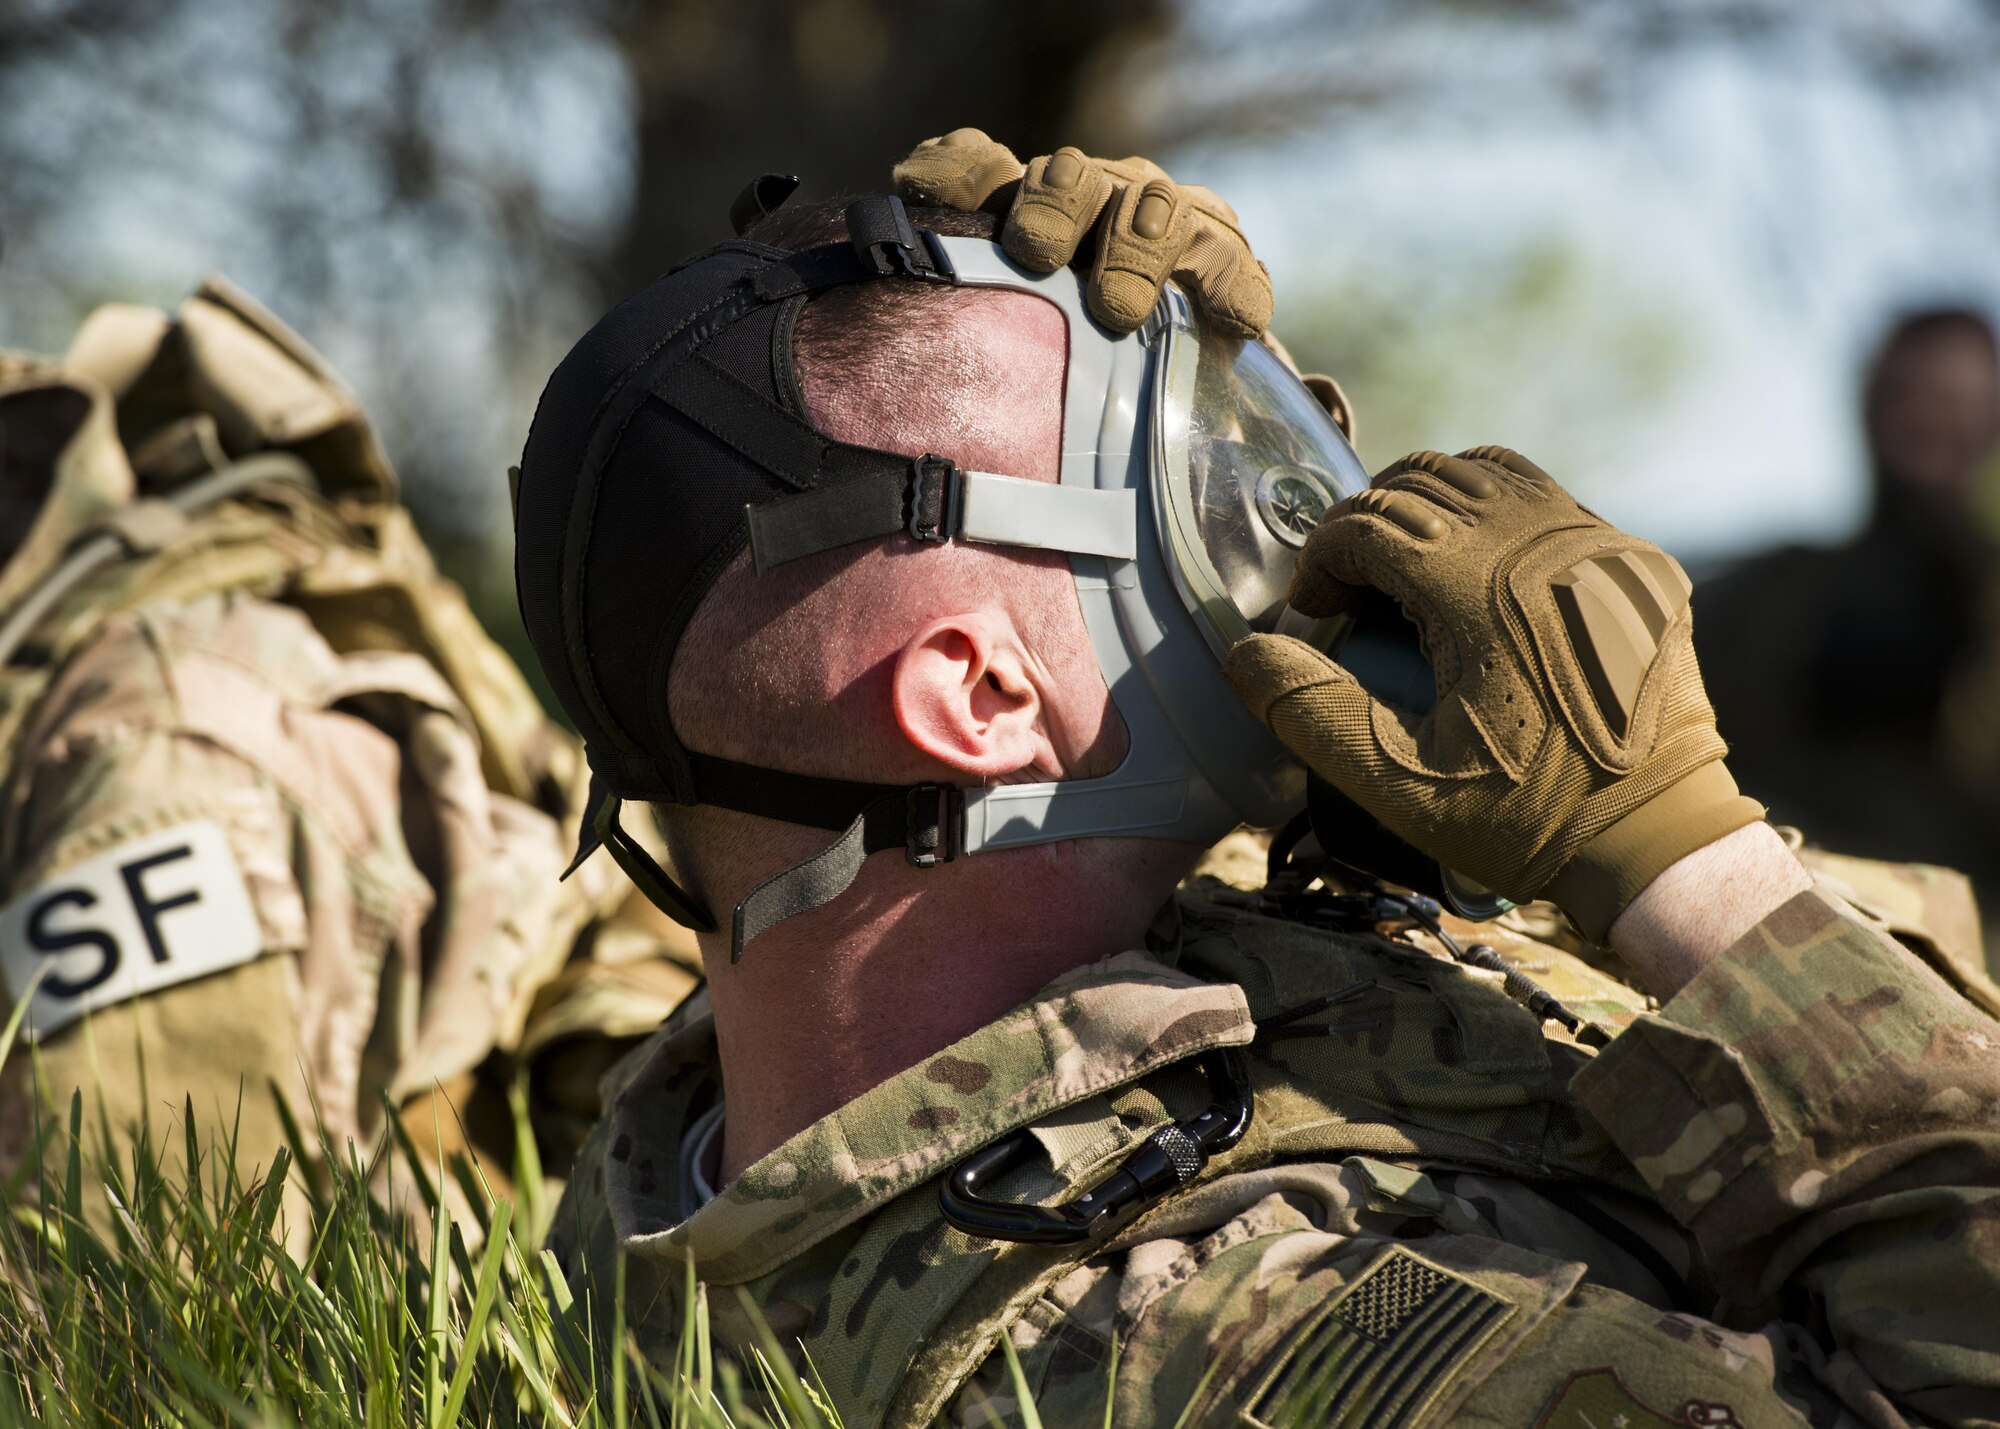 Defenders from the 791st Missile Security Forces Squadron participated in annual tactical training at Minot Air Force Base, N.D., May 23, 2016. Training stations allowed SF members to practice small unit combat tactics, employ inert smoke grenades and perform casualty care and evacuation. These exercises were just a small portion of the tactical maneuver training SF members receive annually. (U.S. Air Force photo/Airman 1st Class J.T. Armstrong)